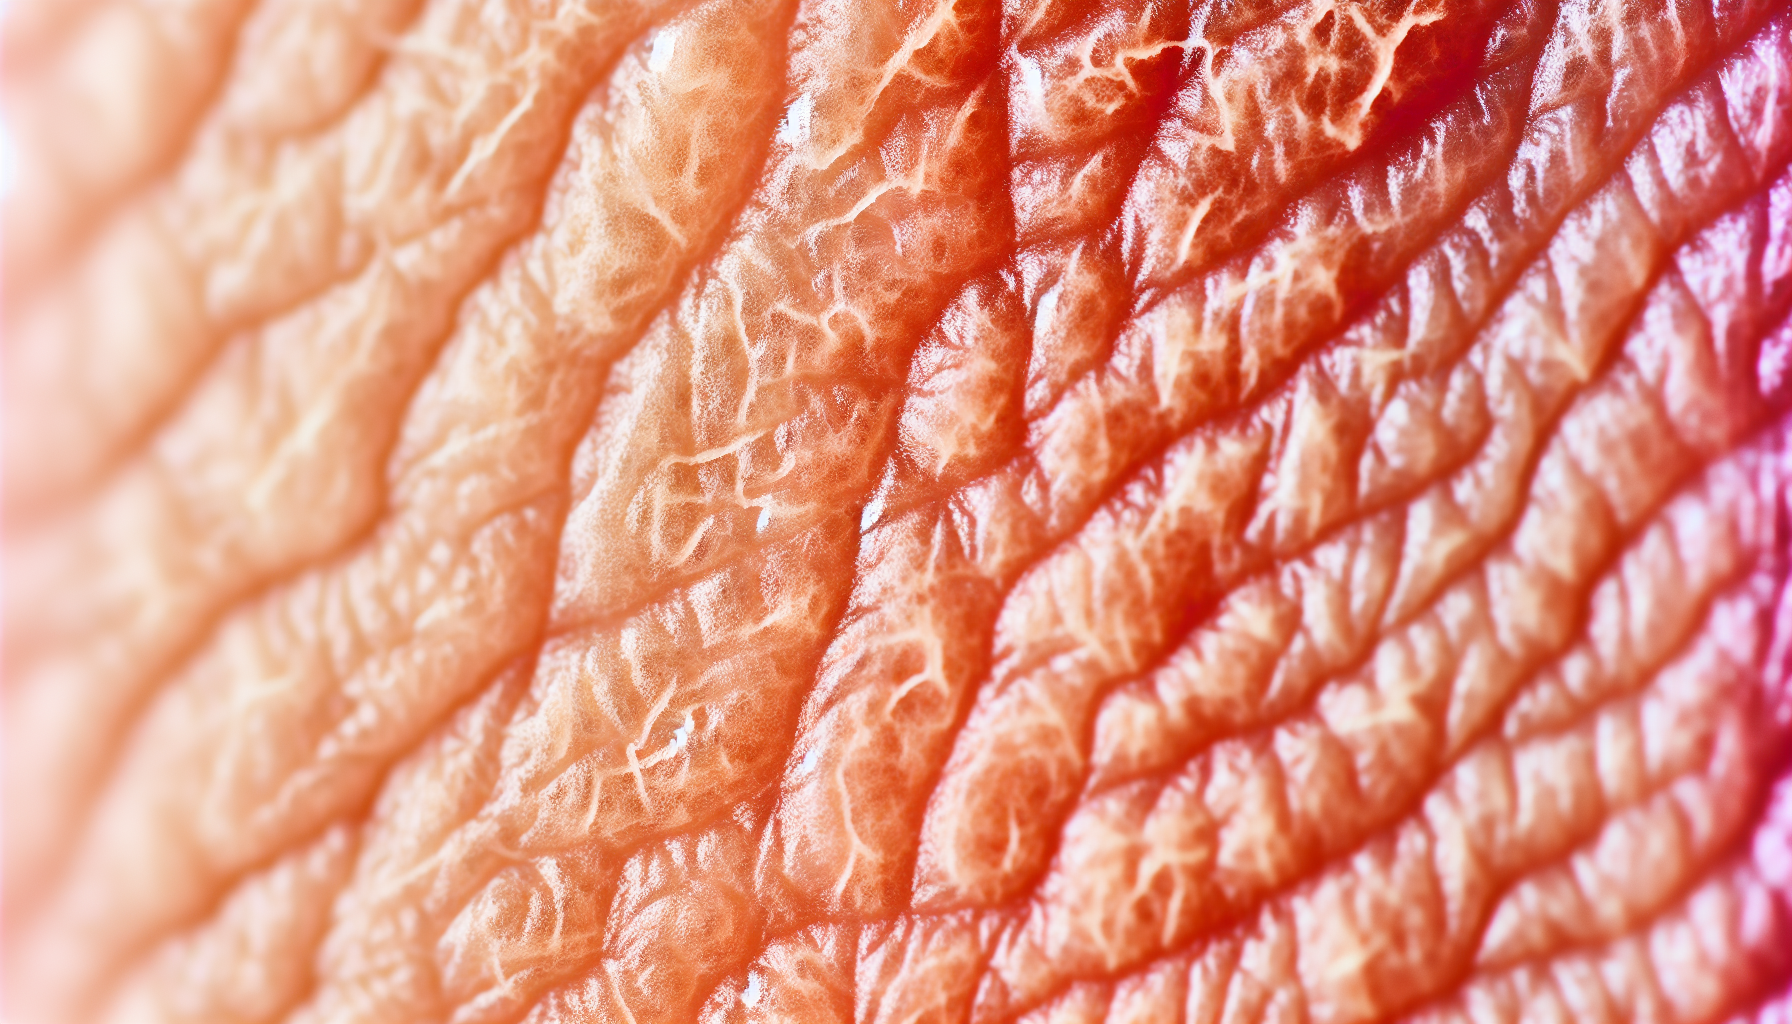 Close-up of aging skin with visible wrinkles